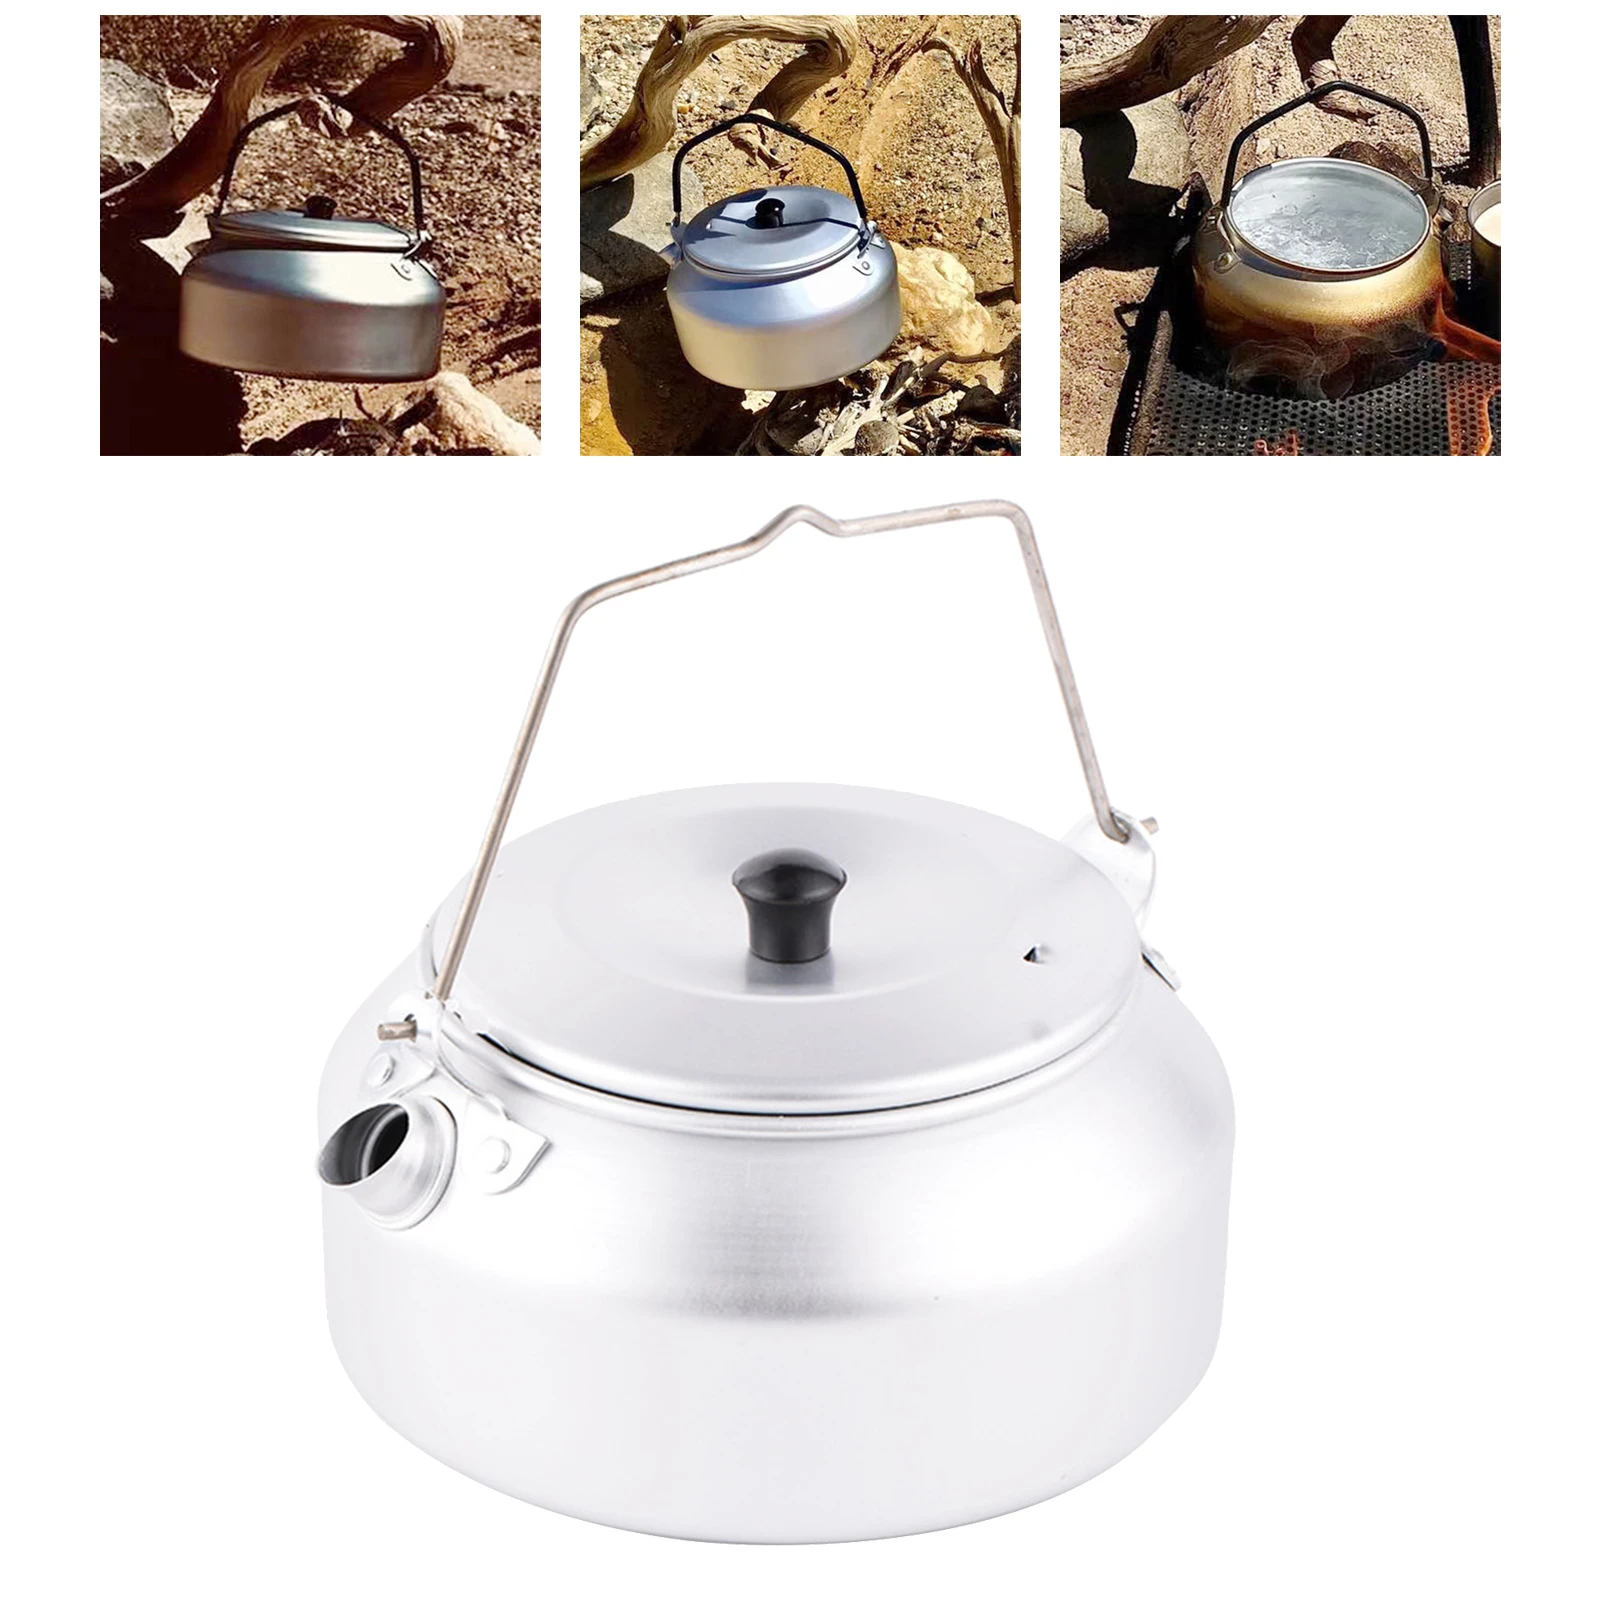 Quick Heating Camping Kettle Ultralight Outdoor Coffee Teapot with Silicon Handle Mesh Pouch 0.8L Aluminum Kettle 